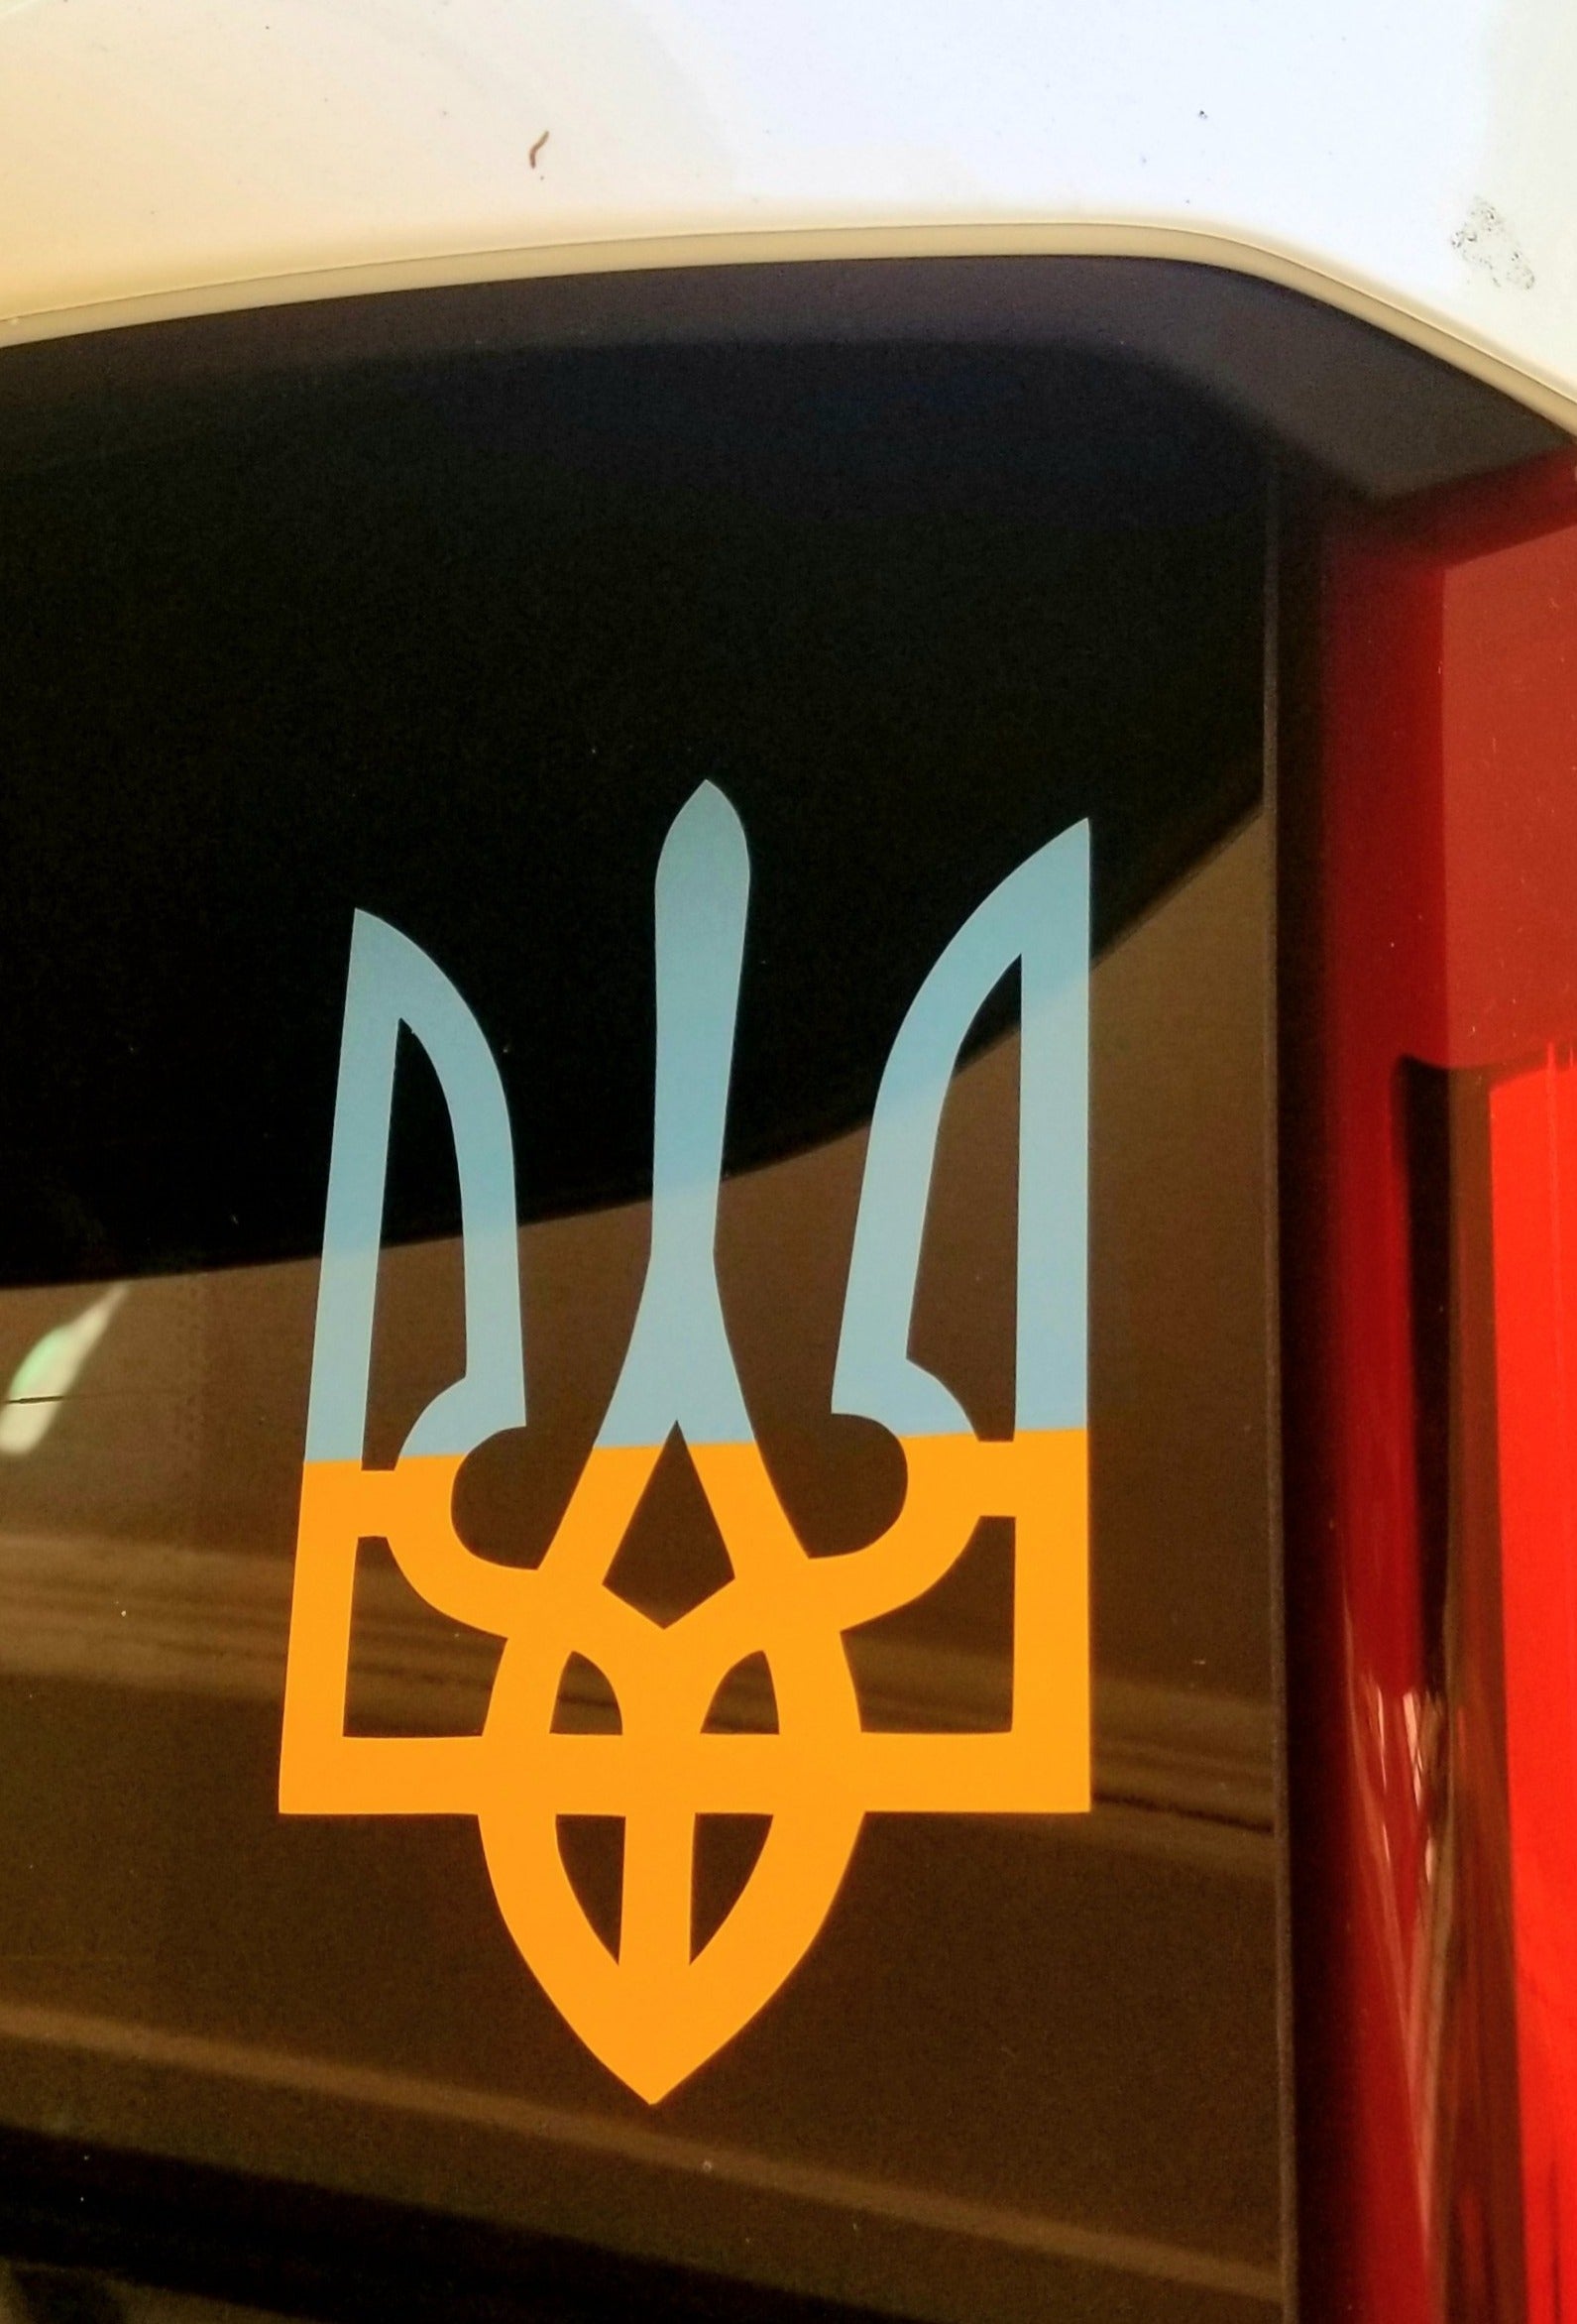 "Tryzub" decal